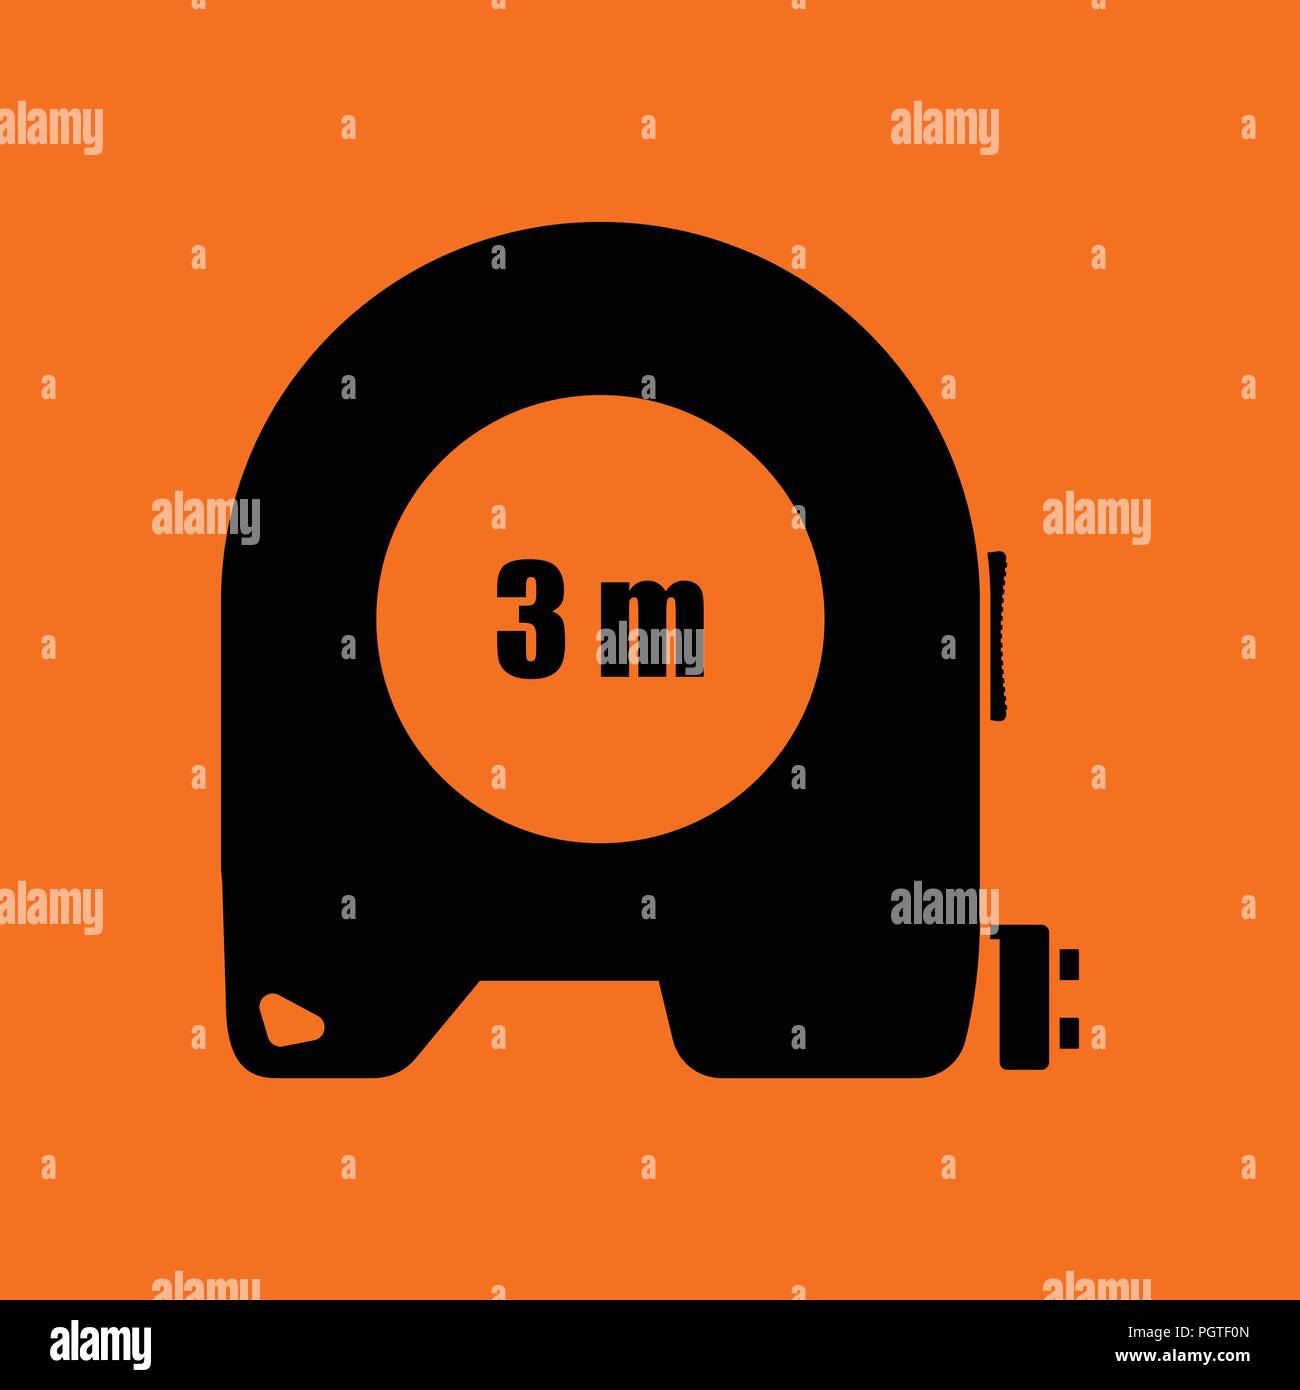 Icon of constriction tape measure. Orange background with black. Vector illustration. Stock Vector